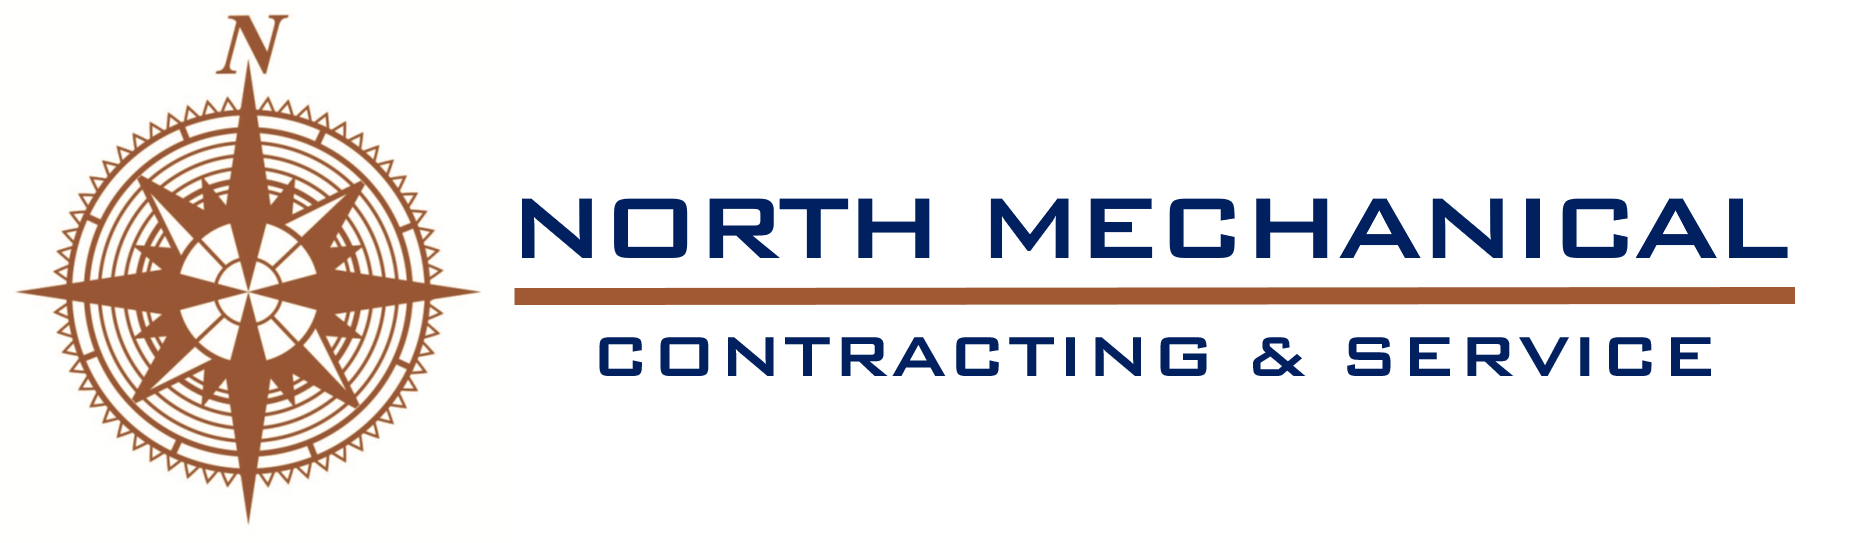 Q. North Mechanical Contracting & Service (Tier 3)